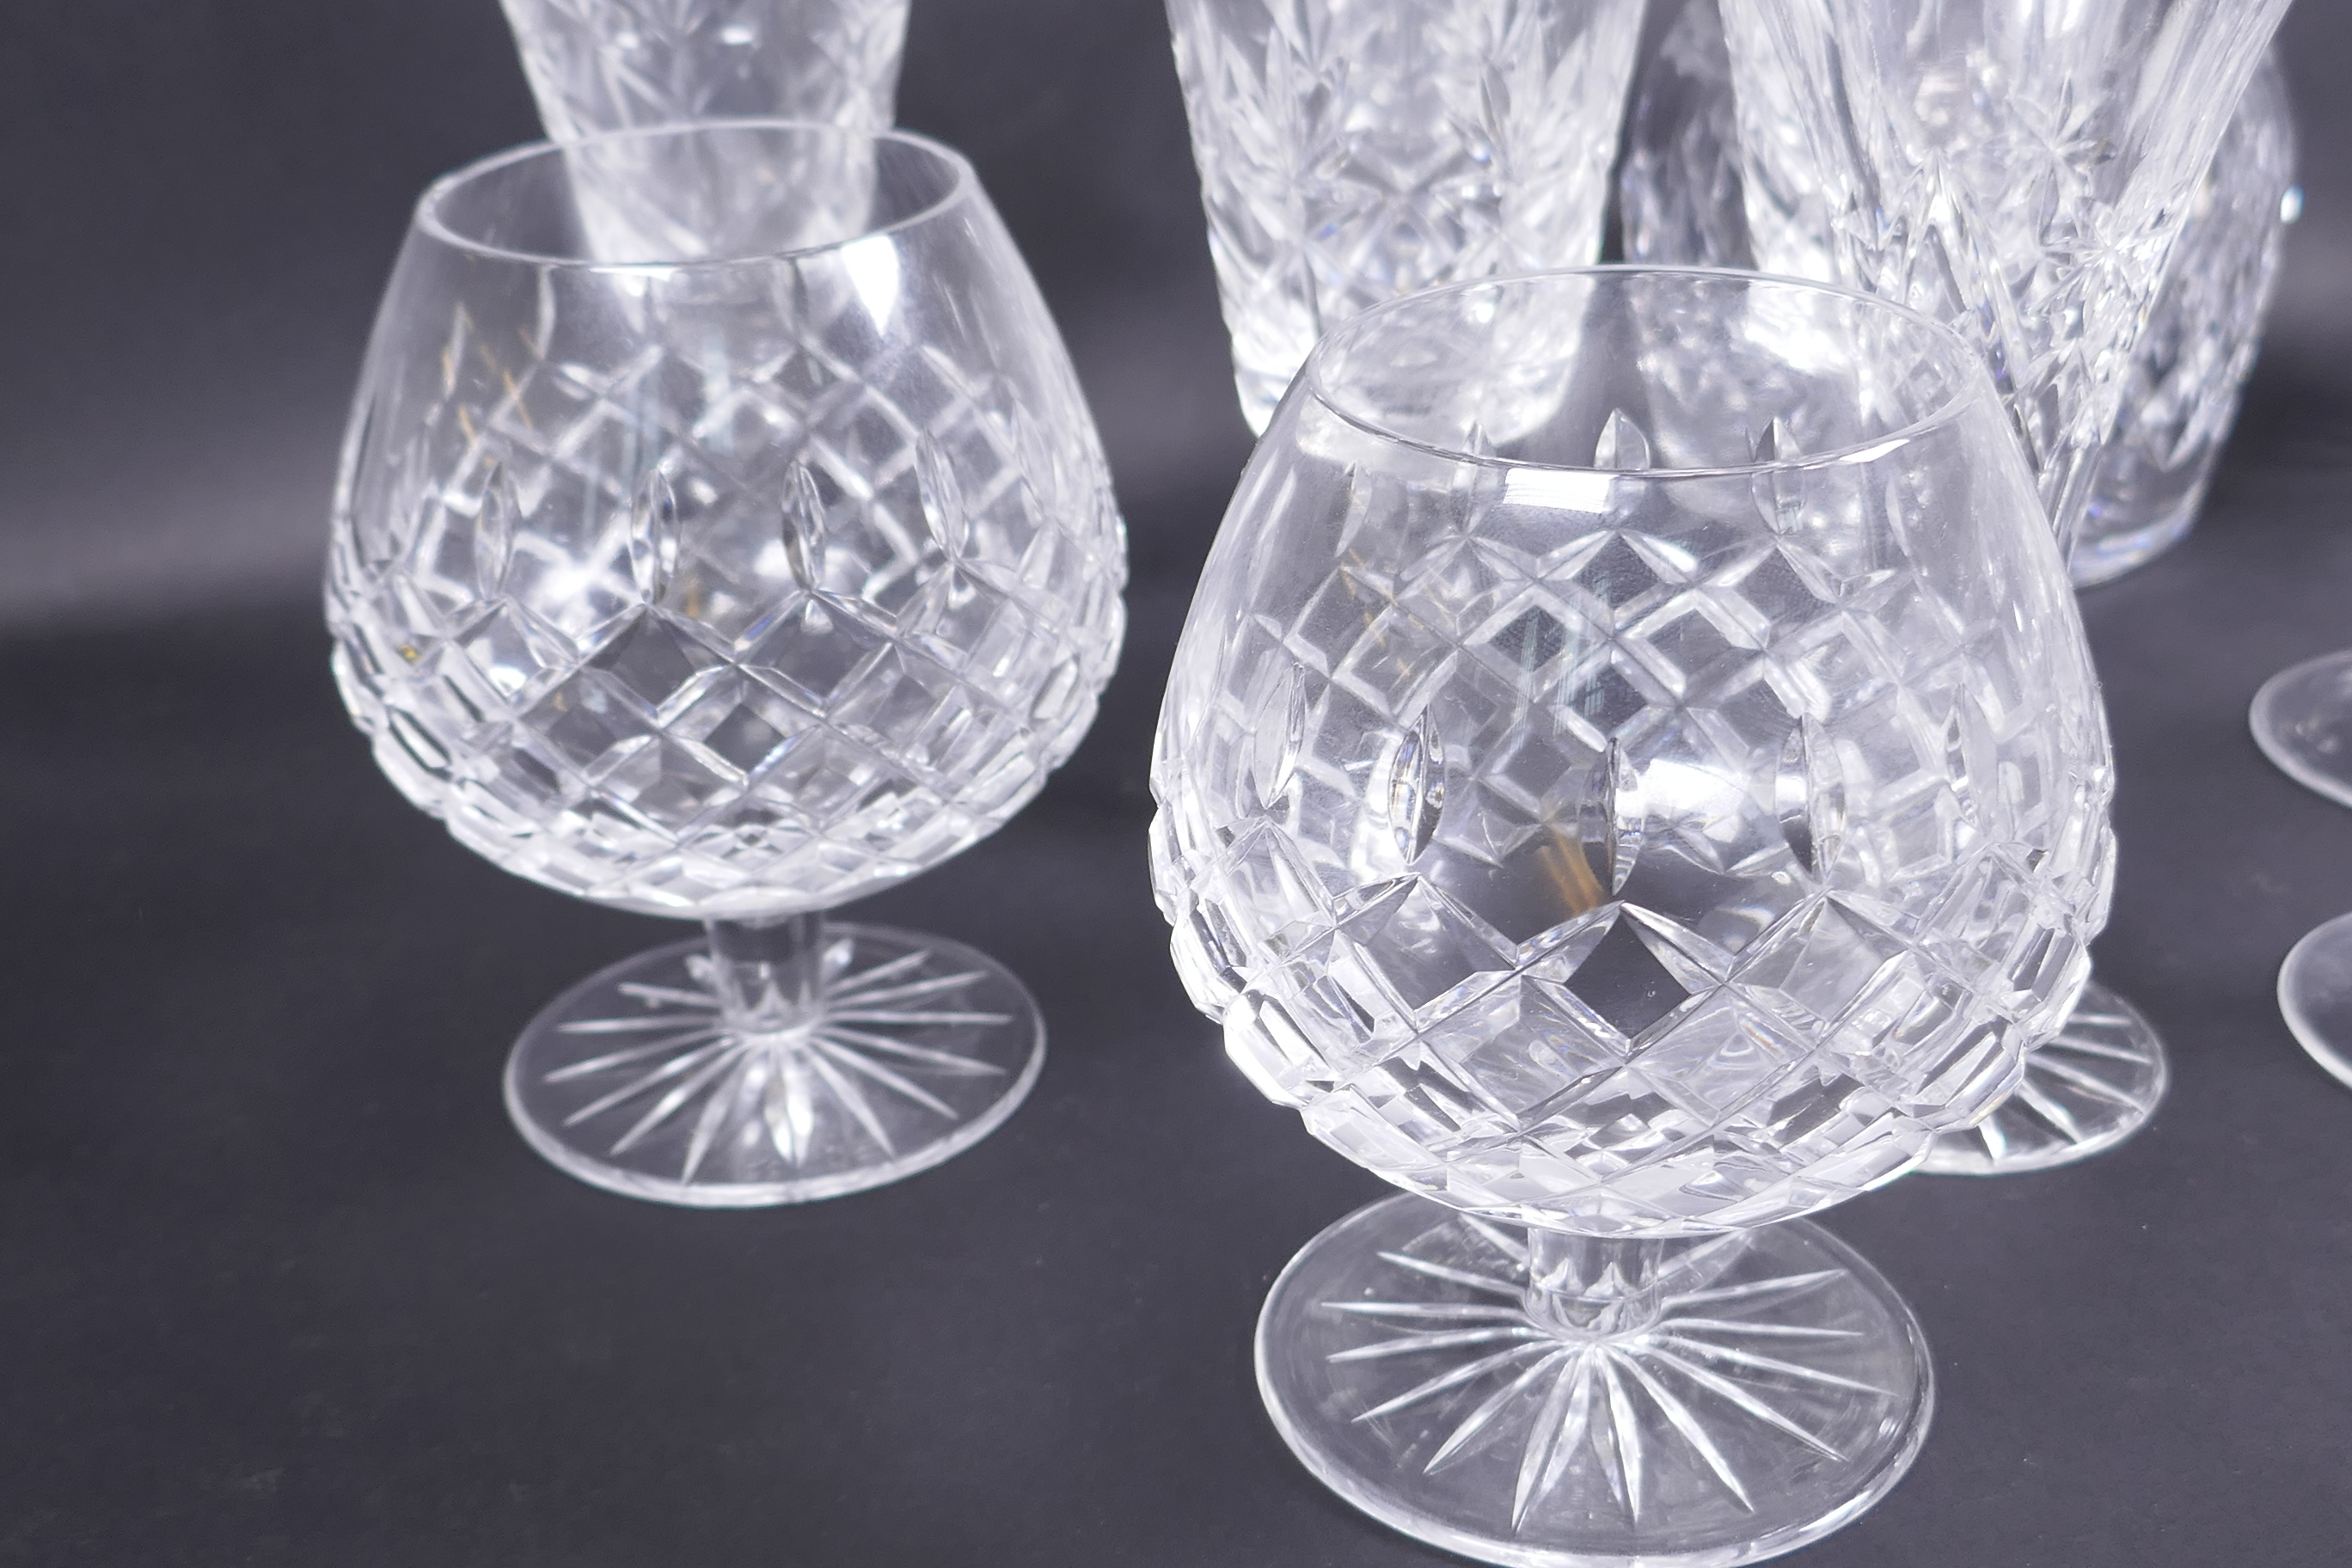 A quantity of good quality glassware including mallet decanter, brandy balloons etc - Image 2 of 3